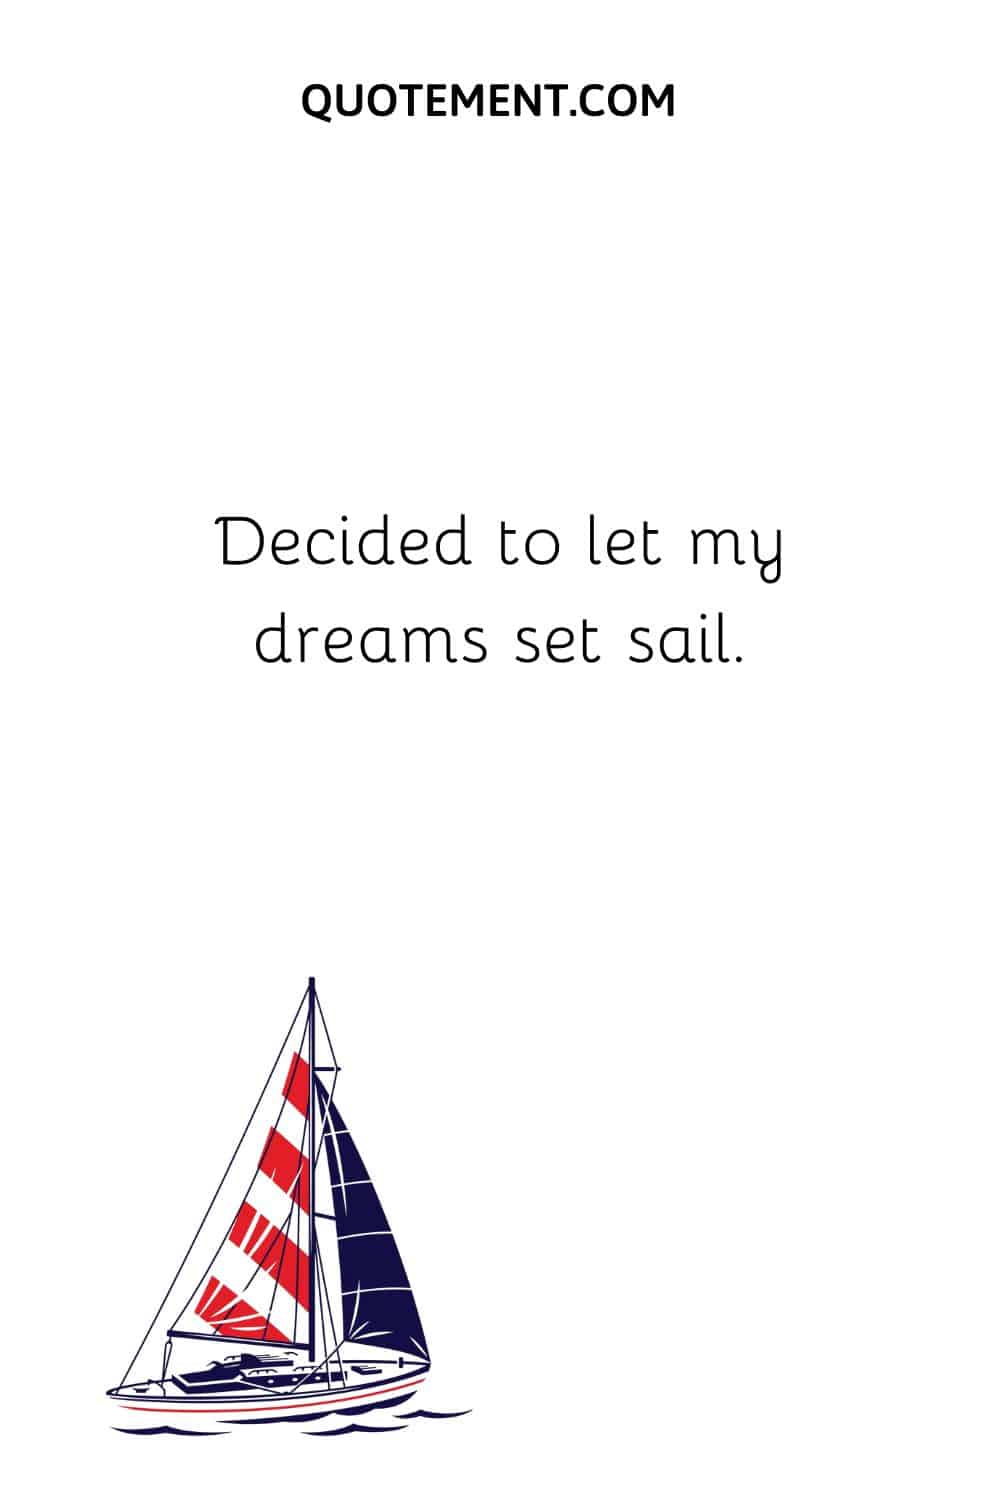 Decided to let my dreams set sail